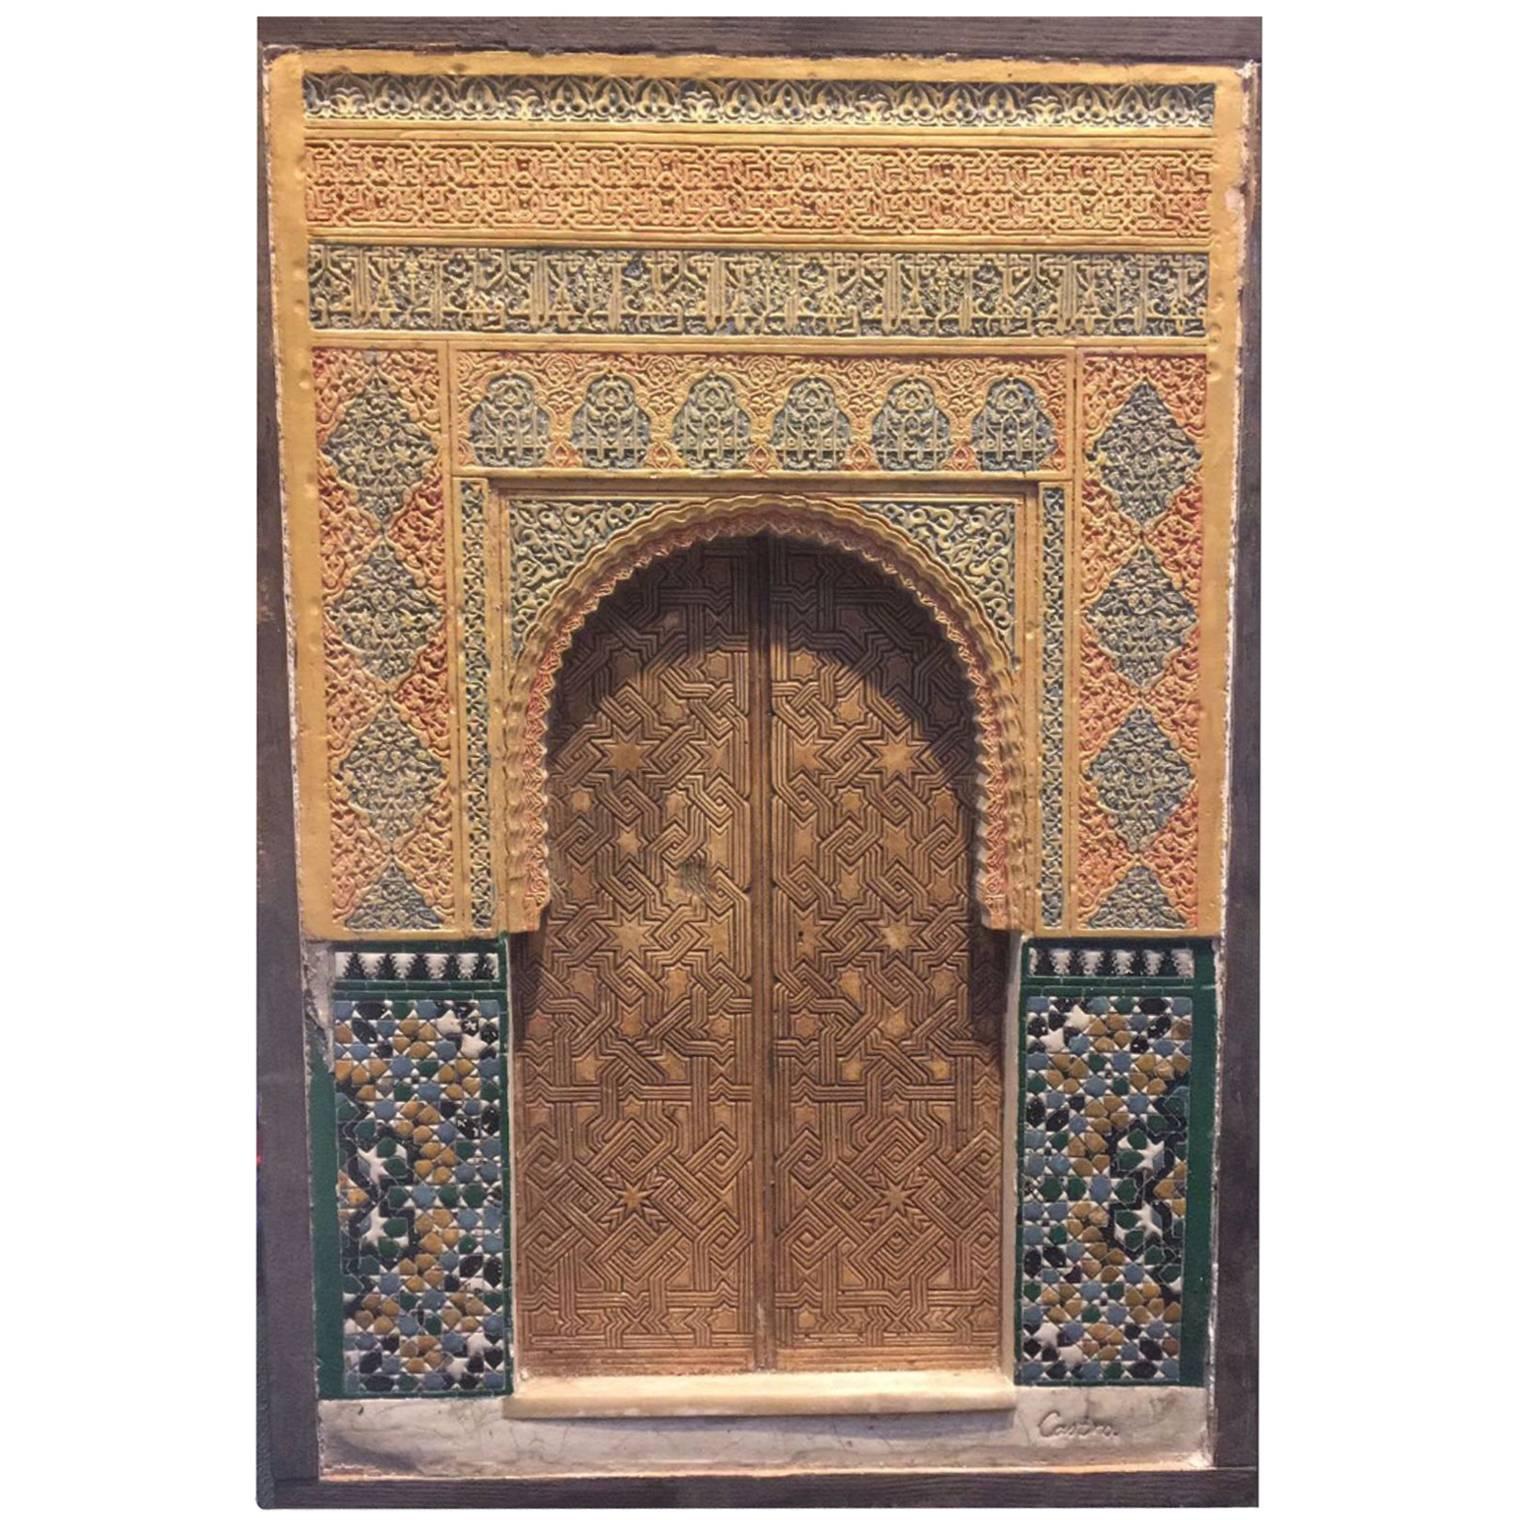 Painted and Carved Plaster Plaque of the Alhambra, Granada, Late 19th Century